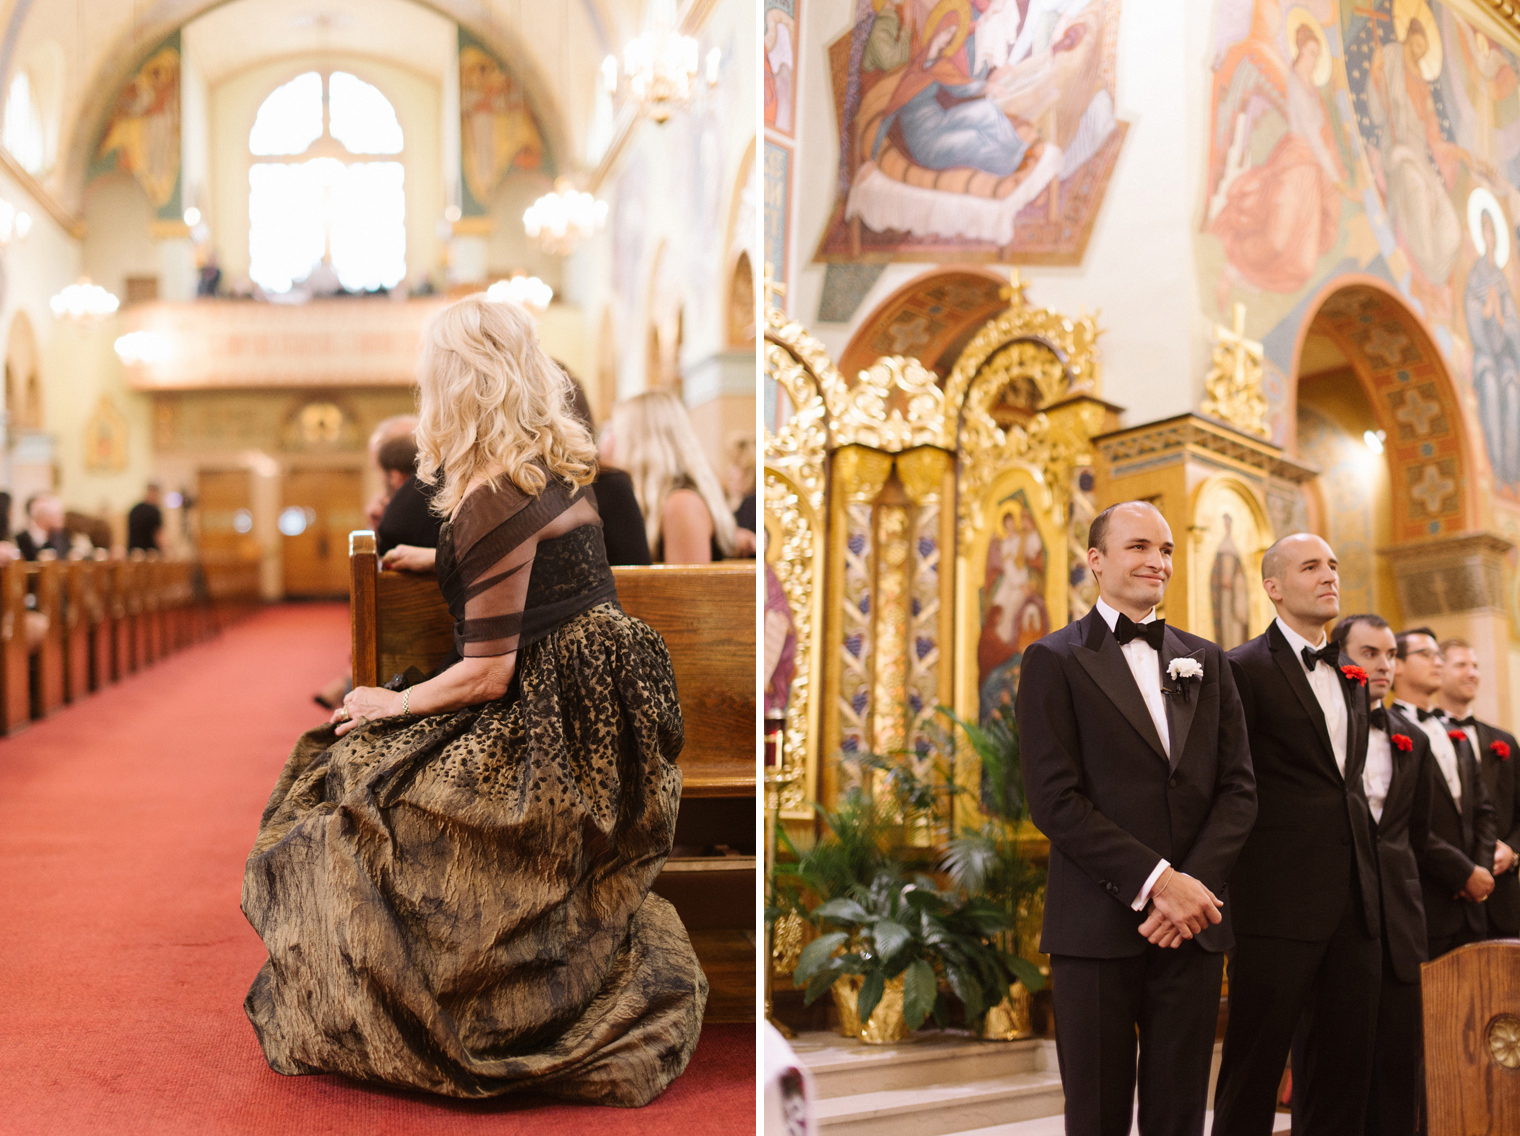 Mother of the bride and the groom watch for the bride coming down the aisle during a Ukrainian Orthodox Wedding Ceremony in Hamtramck Michigan by photographer Heather Jowett.